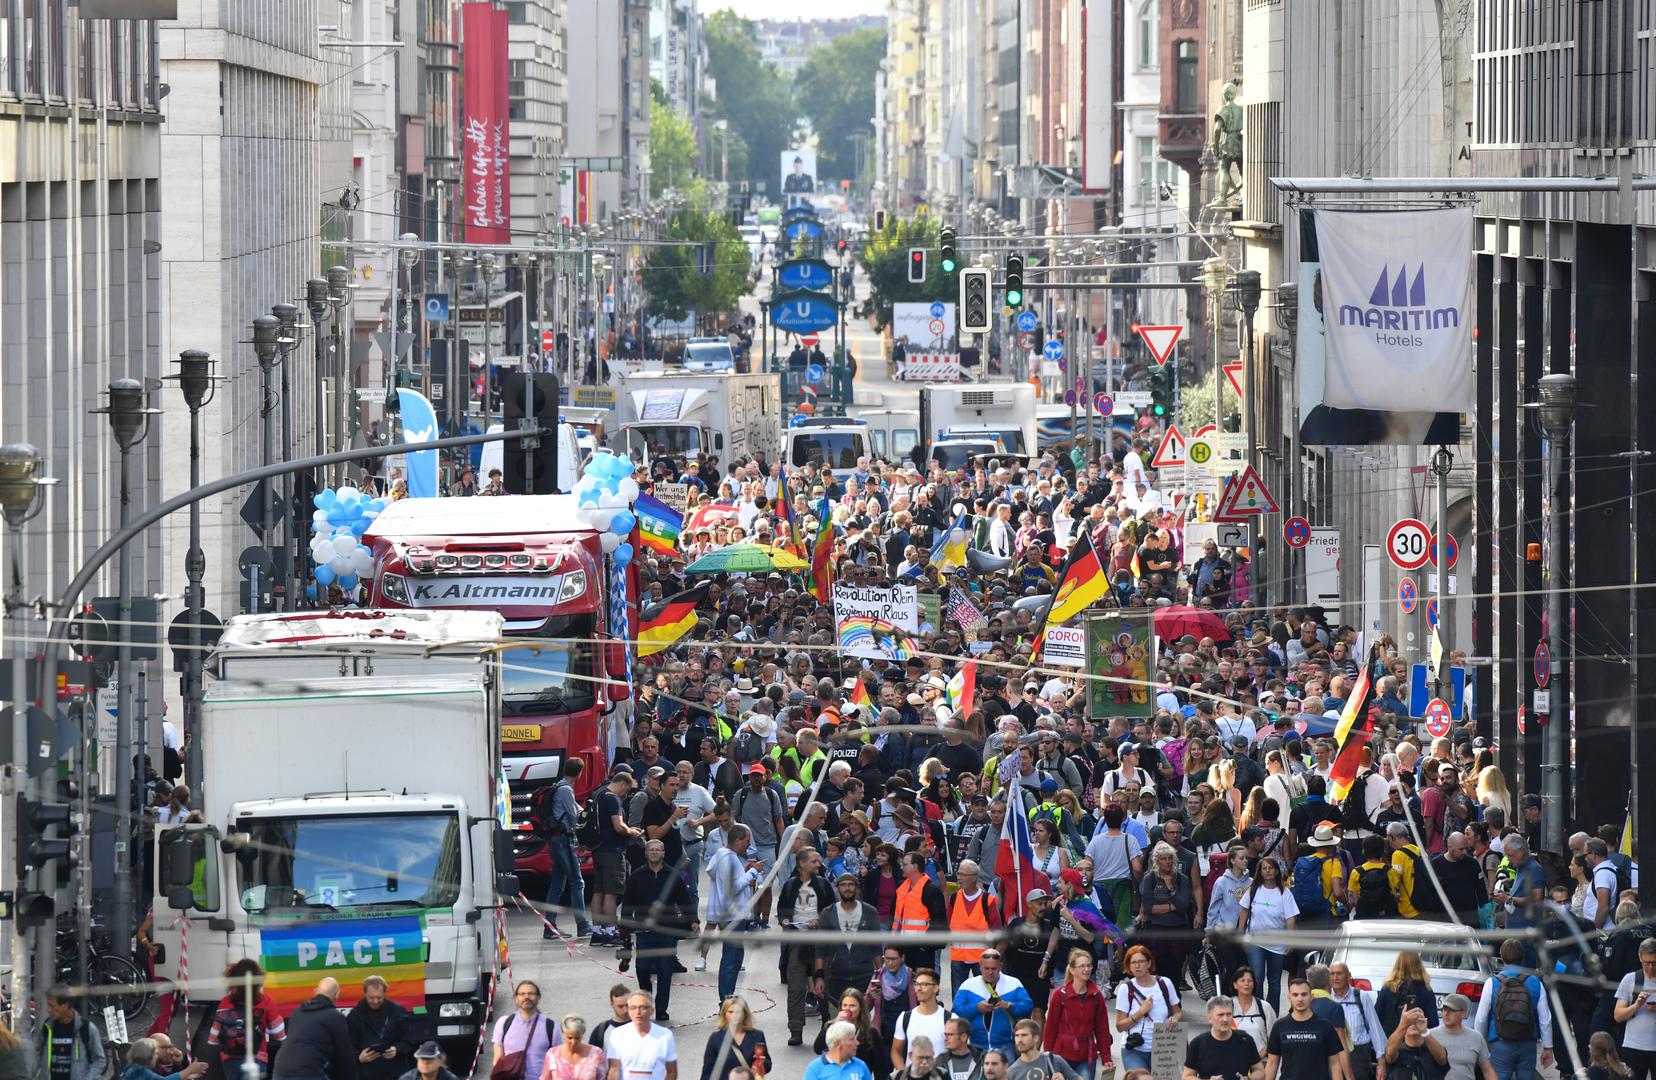 29 August 2020, Berlin: Participants gather in Friedrichstraße for a demonstration against the Corona measures. Photo: Paul Zinken/dpa /DPA/PIXSELL